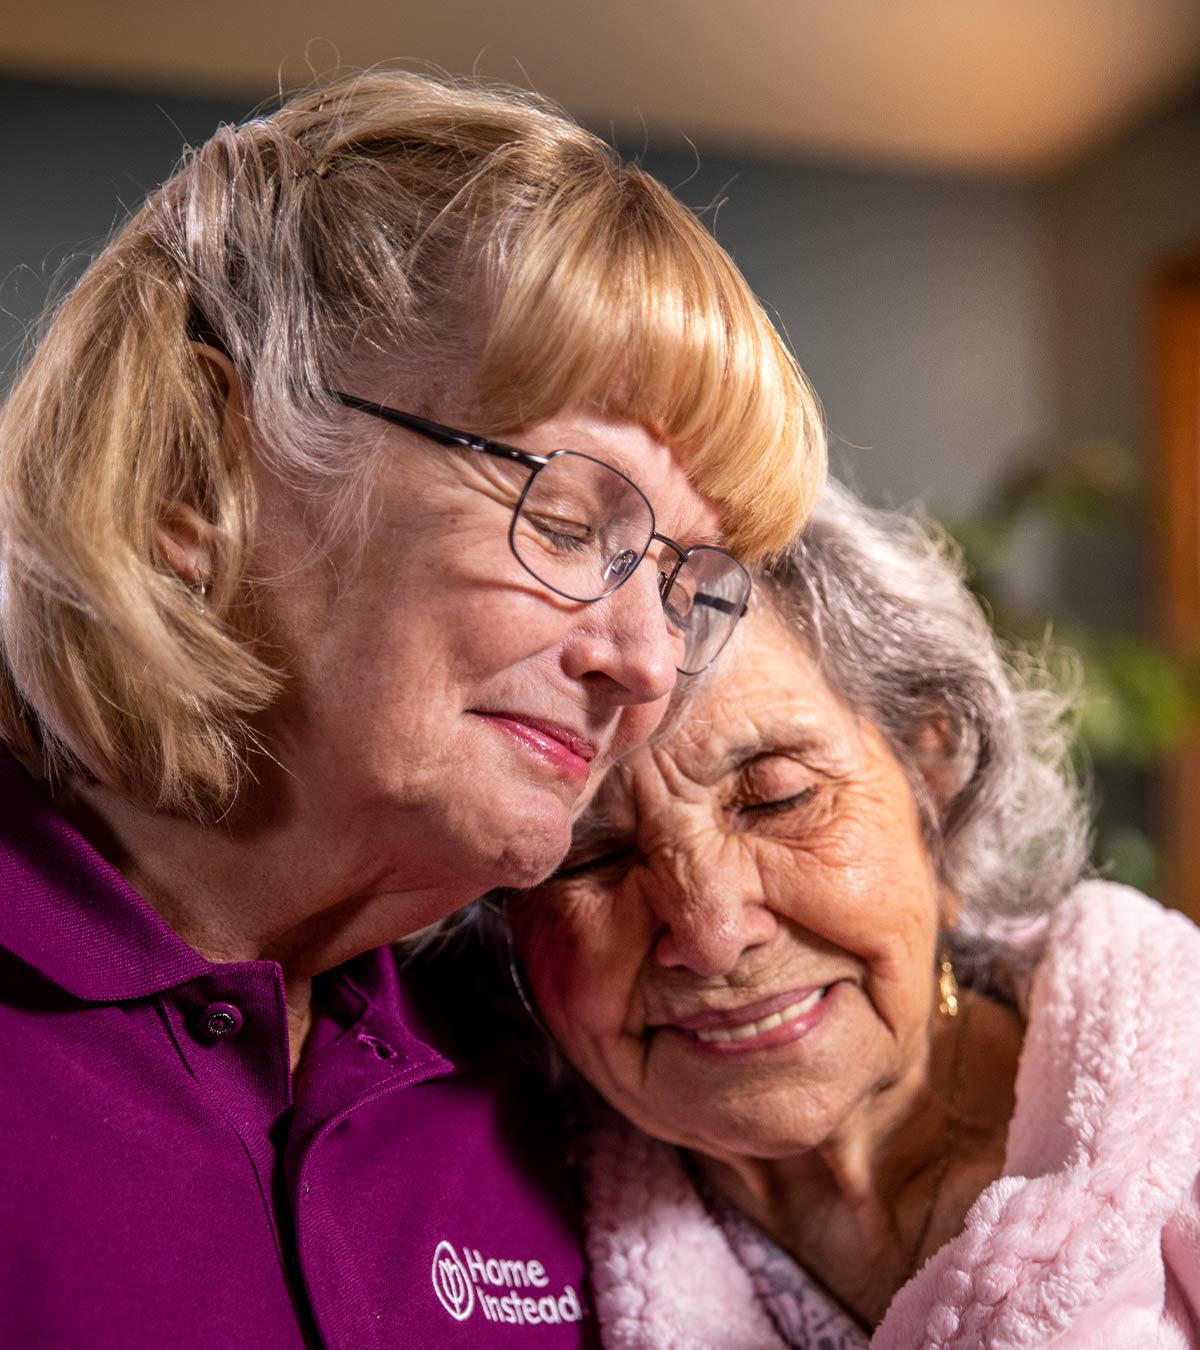 CAREGiver providing in-home senior care services. Home Instead of Brandon, FL provides Elder Care to aging adults. 